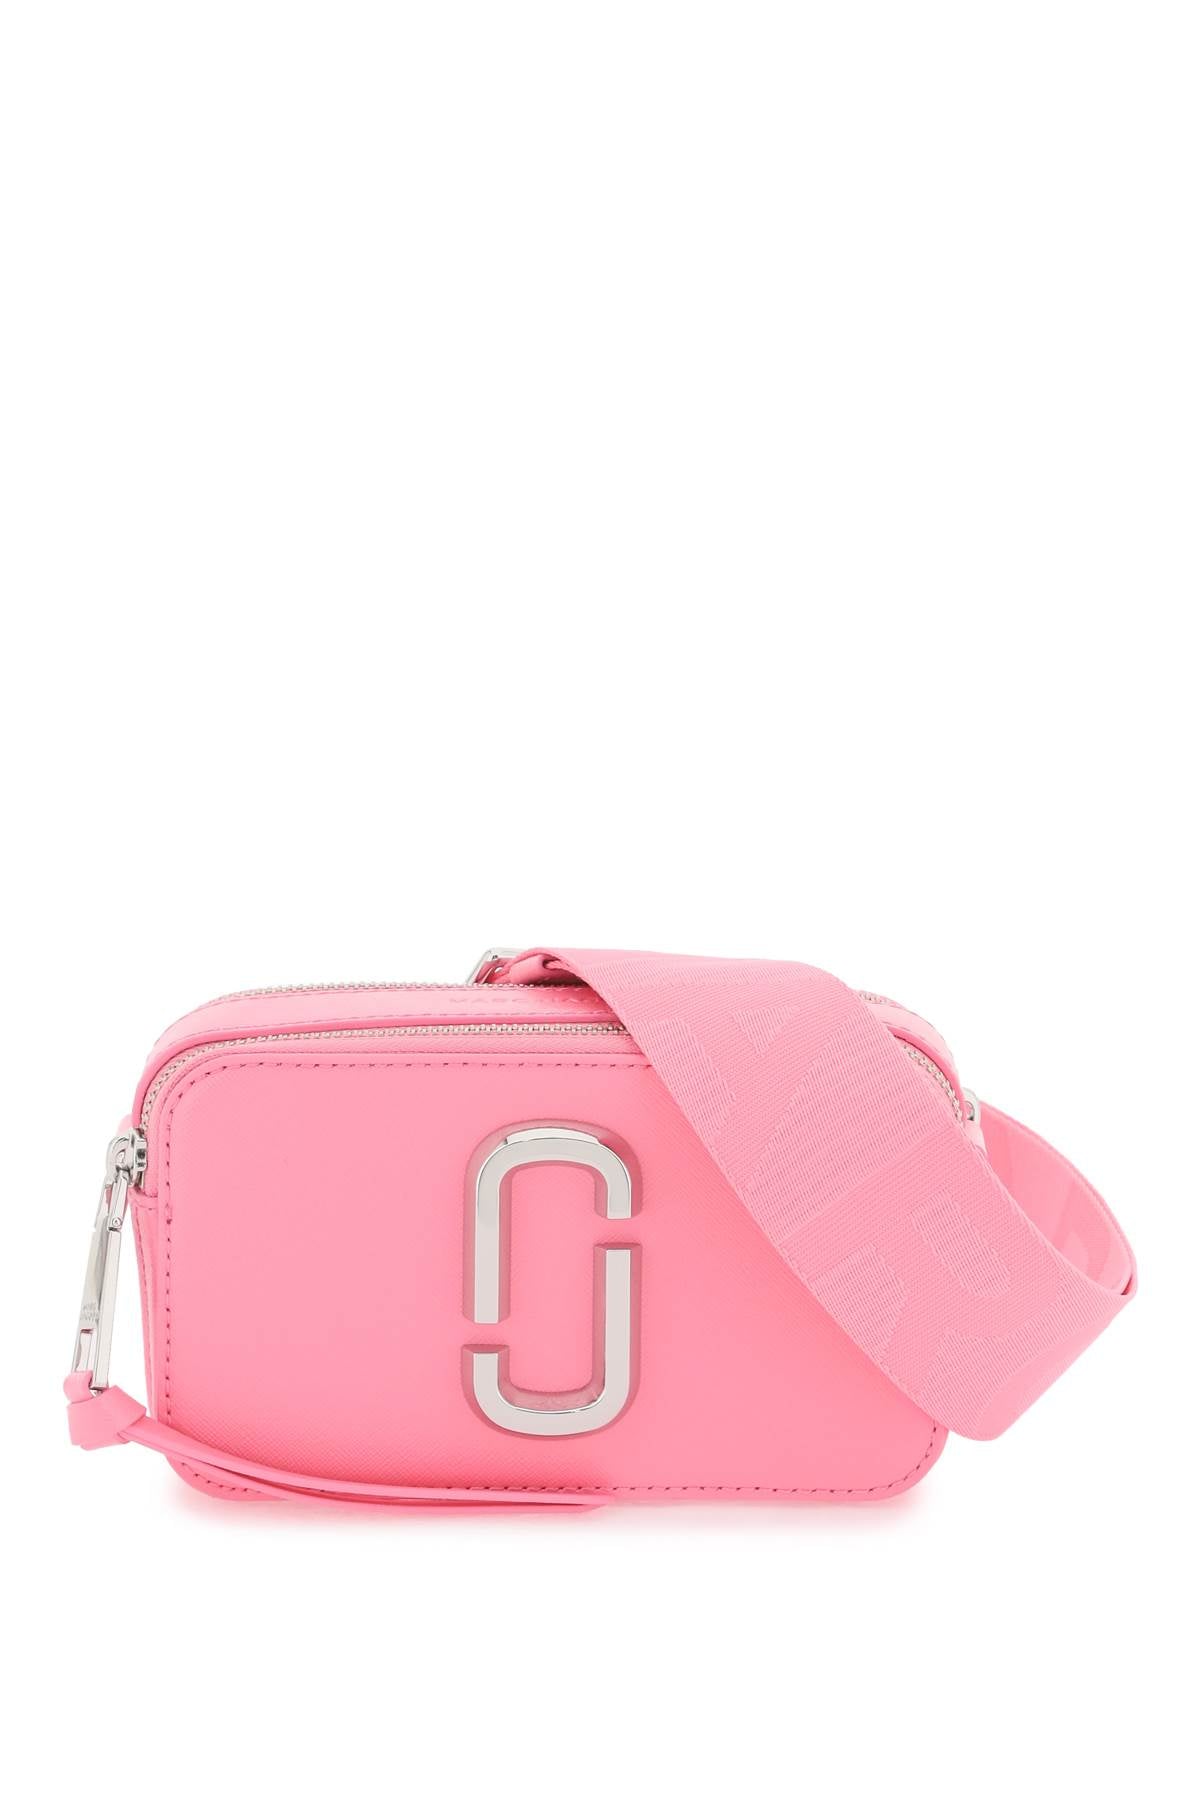 Marc jacobs the utility snapshot camera bag-0